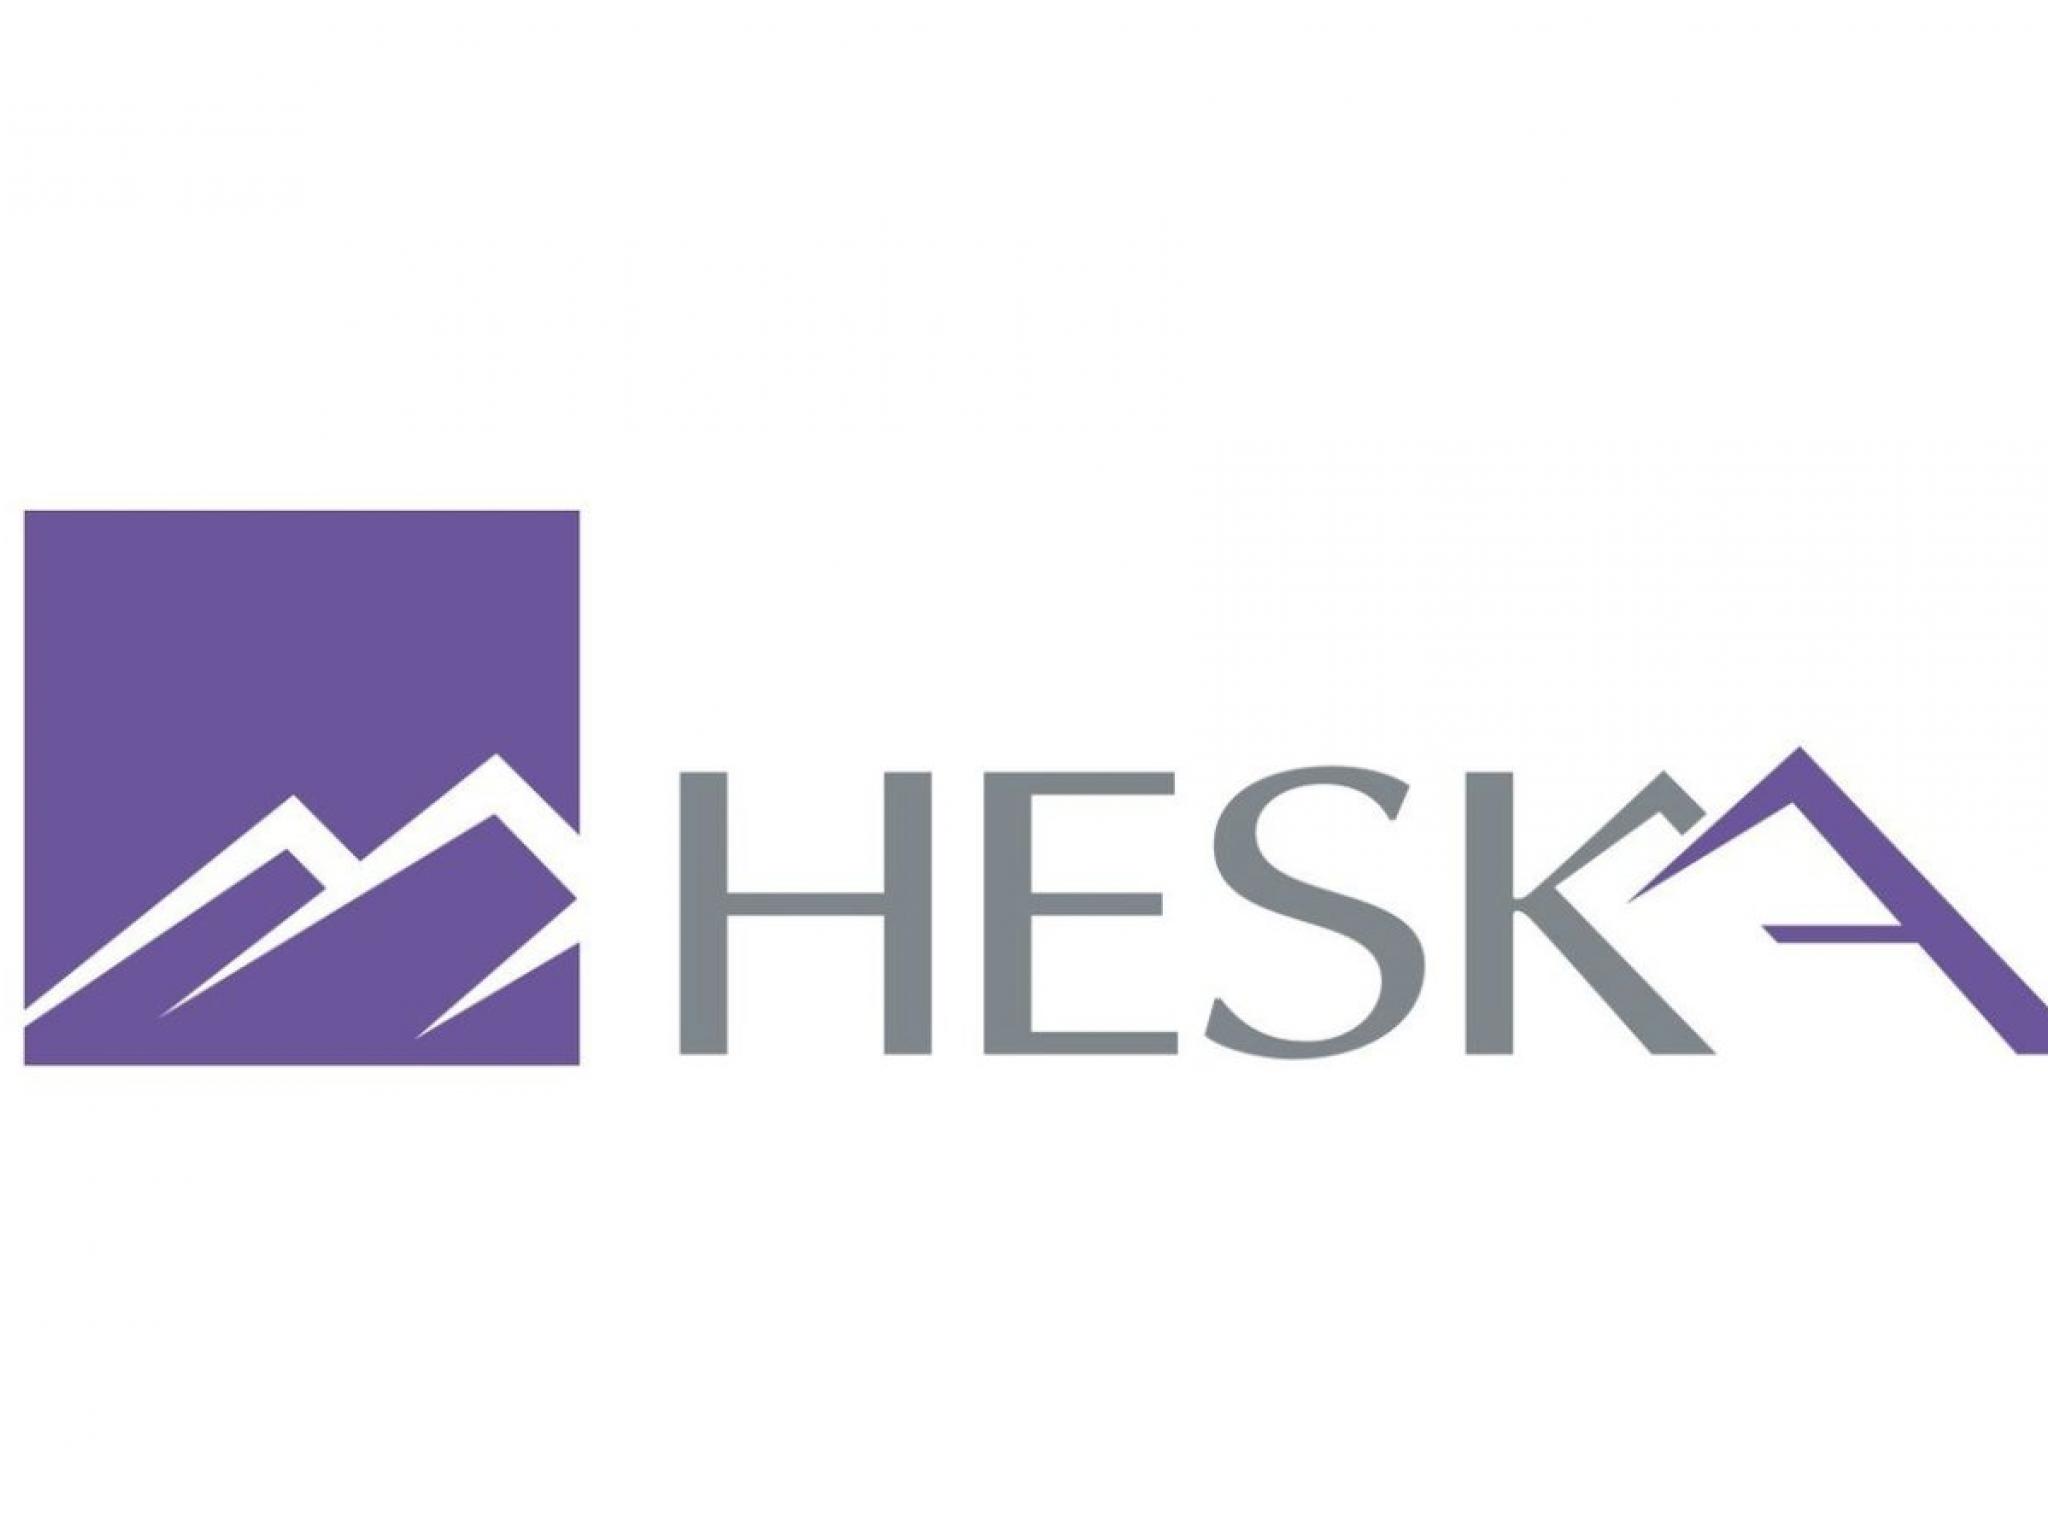  why-heska-shares-are-trading-higher-by-20-here-are-other-stocks-moving-in-mondays-mid-day-session 